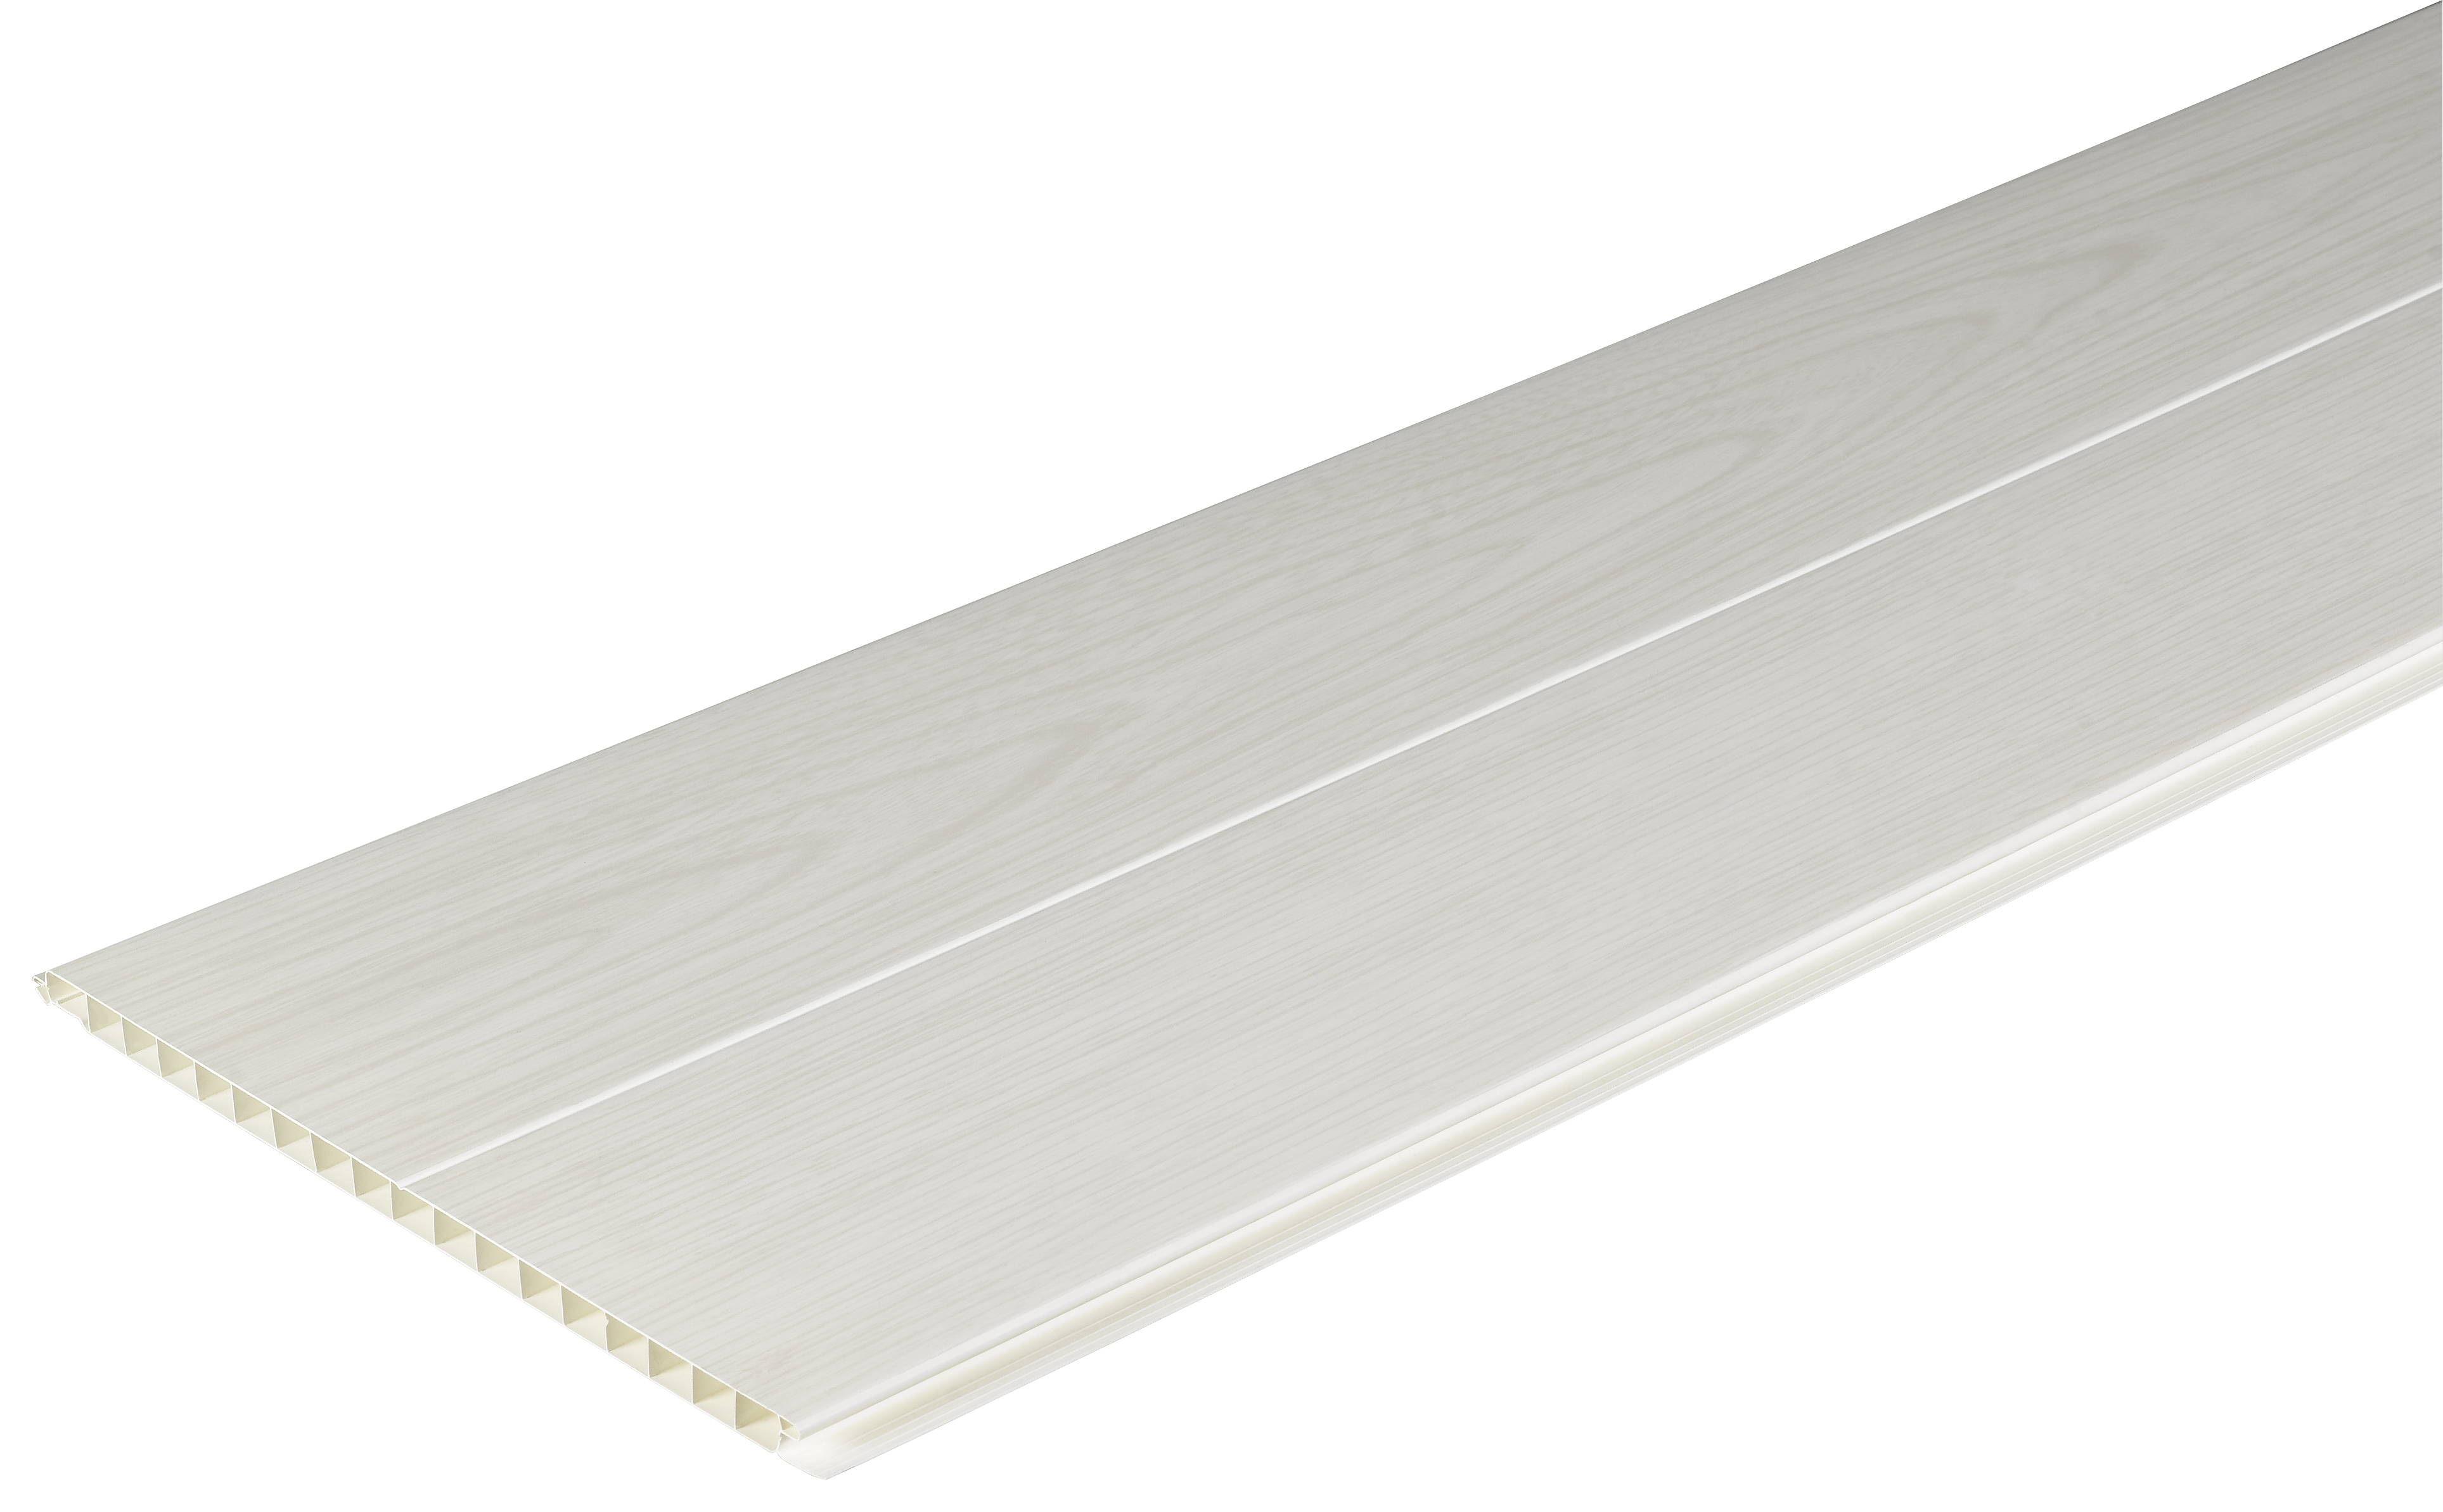 Wickes PVCu White Ash Effect Interior Cladding - 250 x 2500mm - Pack of 4